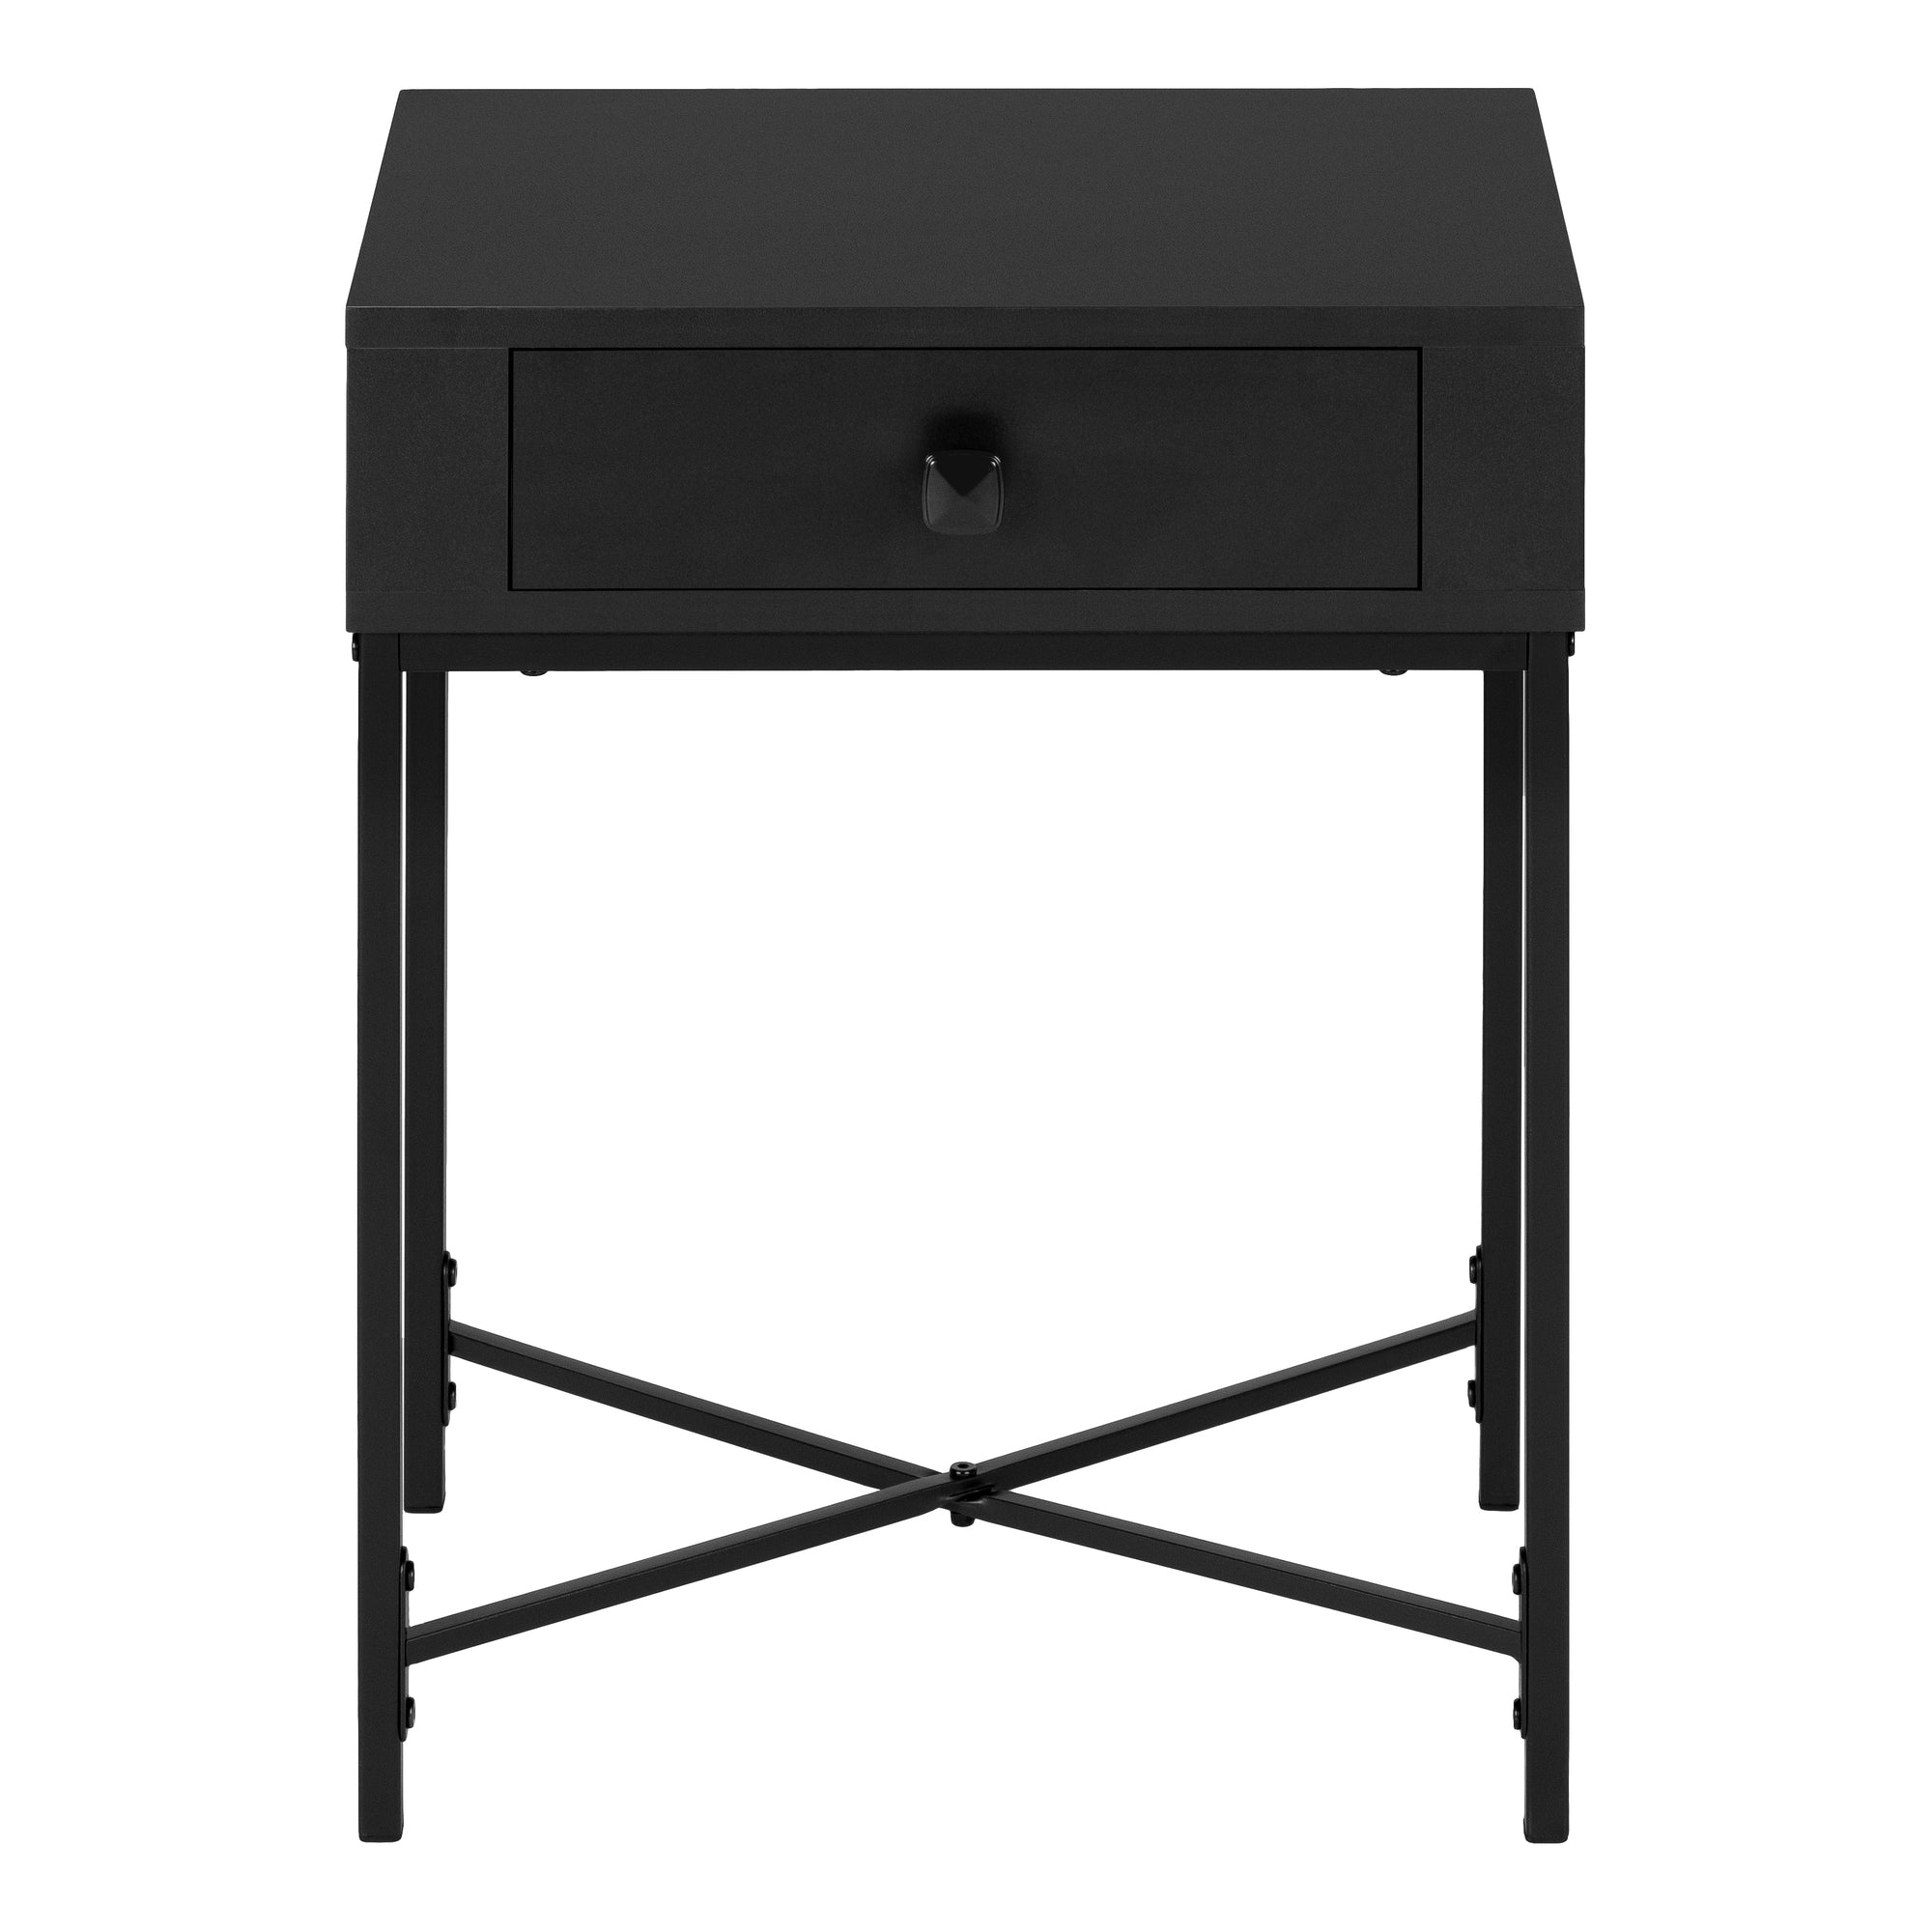 MN-283542    Accent Table, Side, End, Nightstand, Lamp, Living Room, Bedroom, Metal Legs, Laminate, Black, Contemporary, Modern